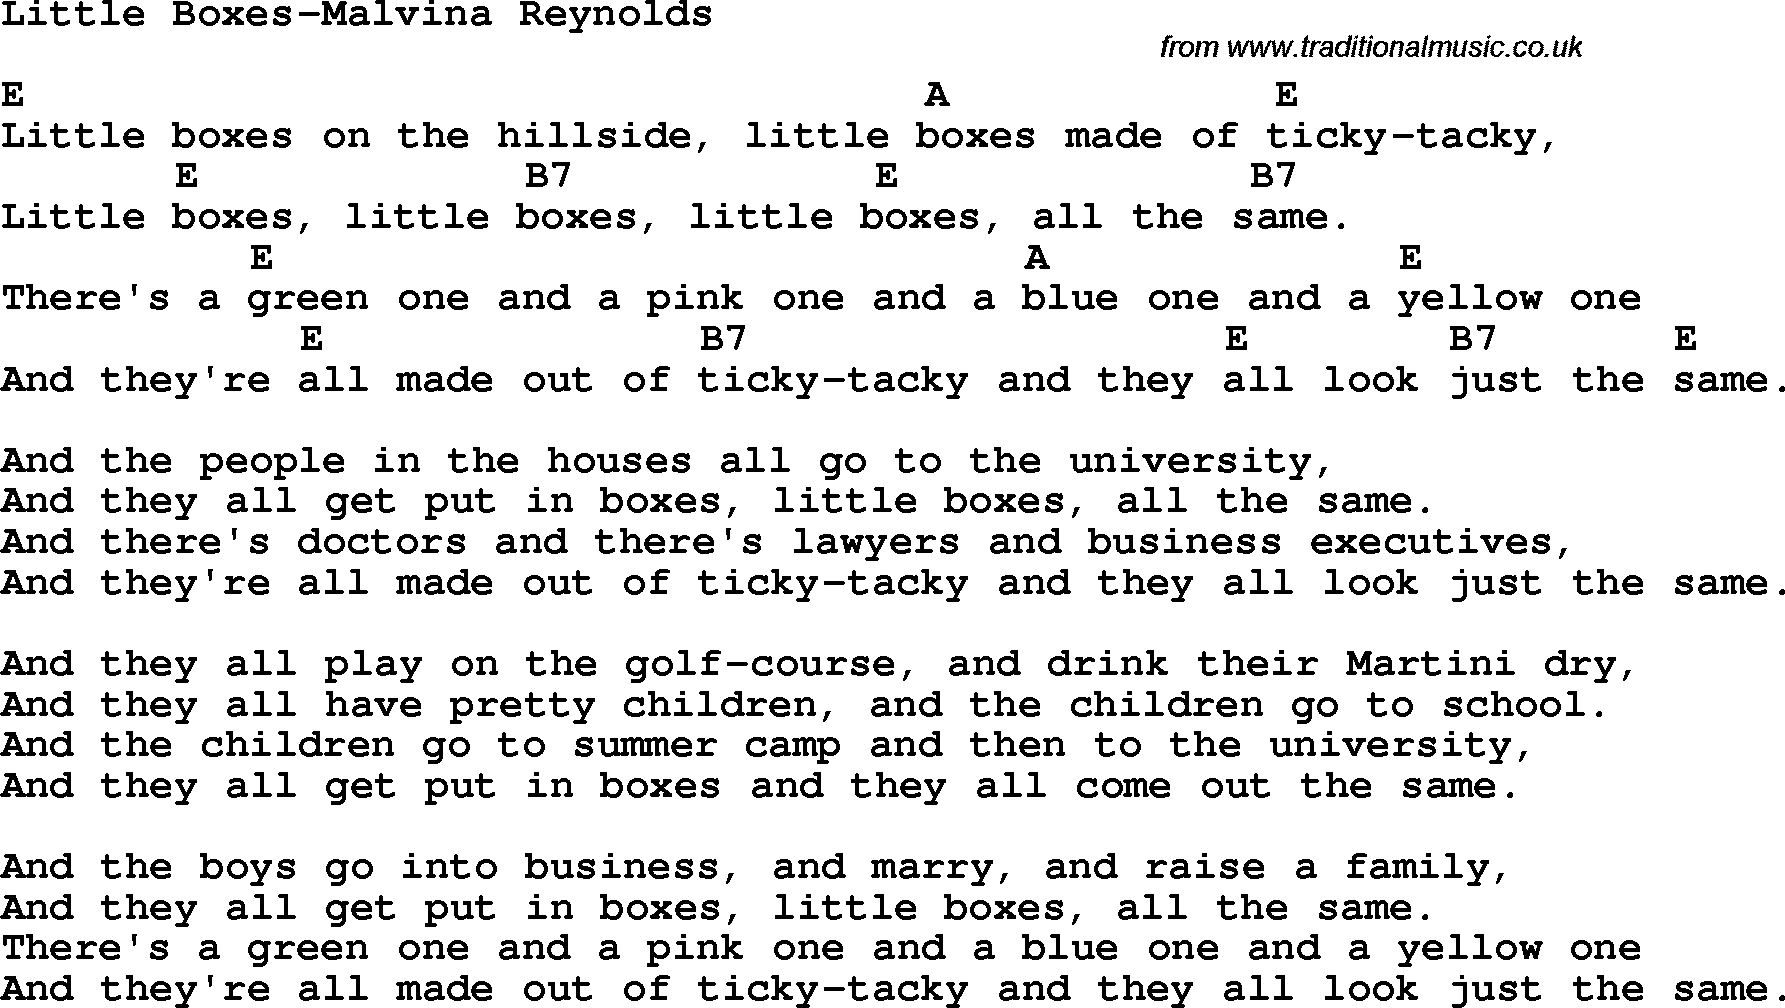 Protest Song Little Boxes-Malvina Reynolds lyrics and chords